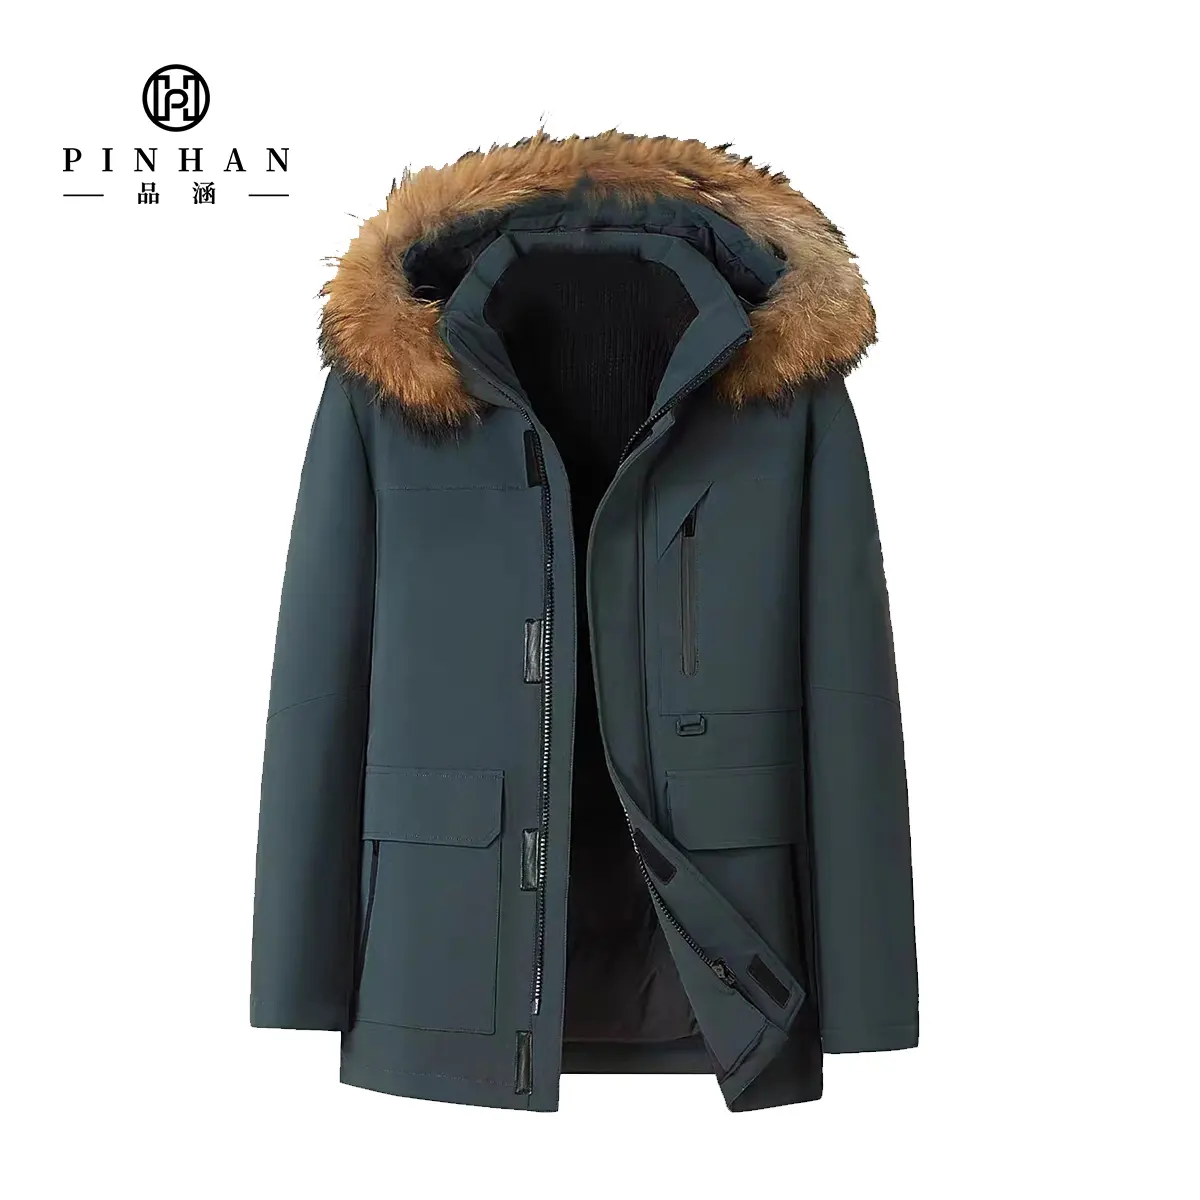 Magic Tape Placket Design Men's Casual Outdoor Clothing Men's Down Jacket with Hood and Fur Collar Stylish Smooth Unisex Jacket